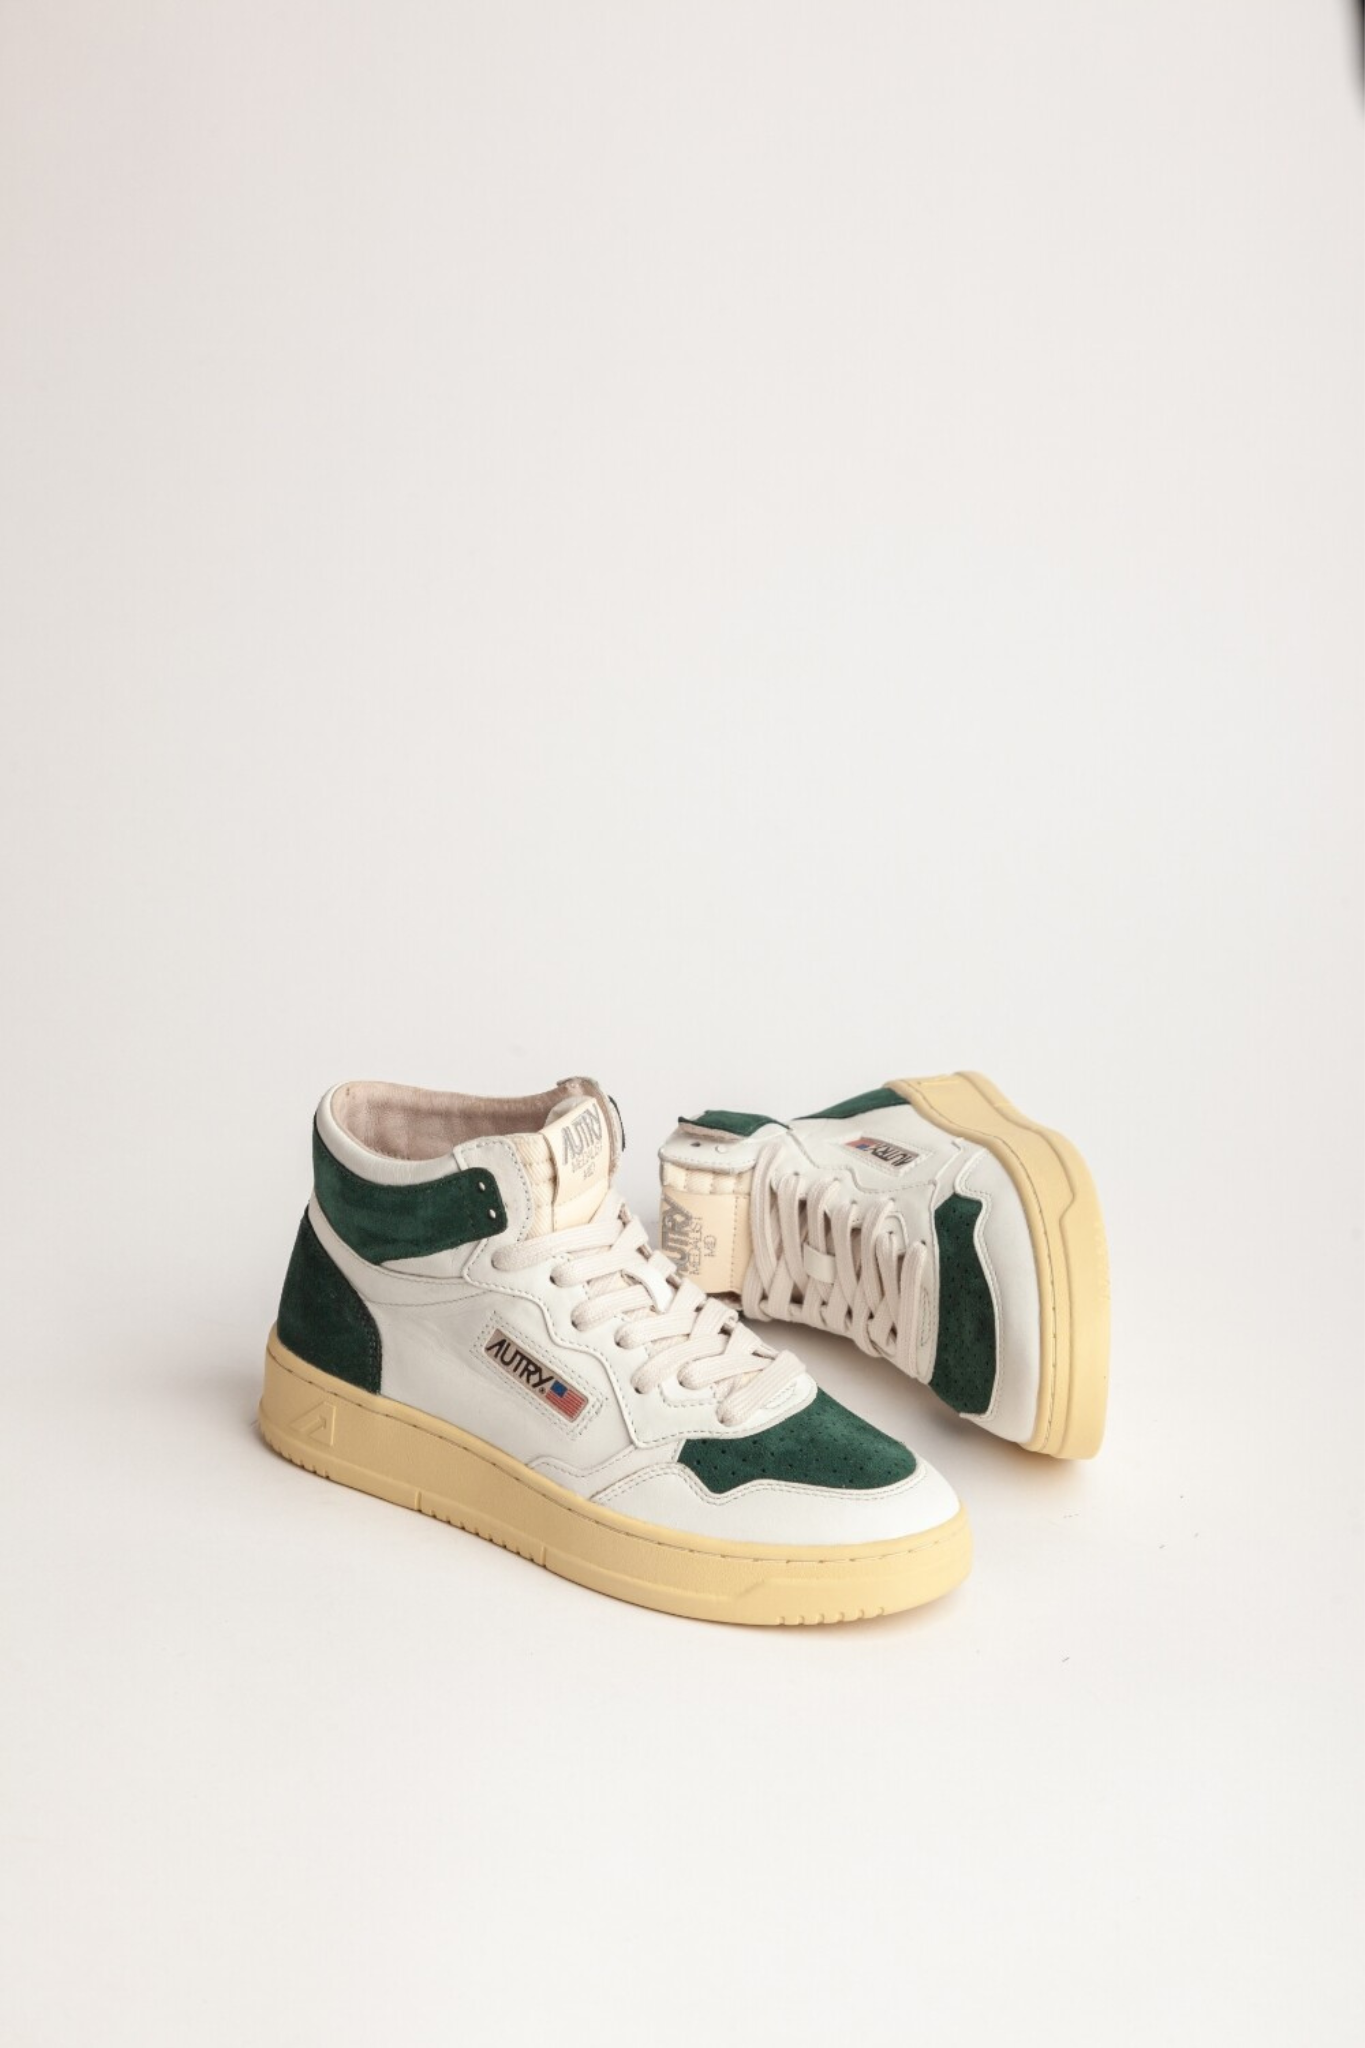 AUMW-SL09 - MEDALIST MID SNEAKERS IN LEATHER AND SUEDE COLOR WHITE AND BOTTLE